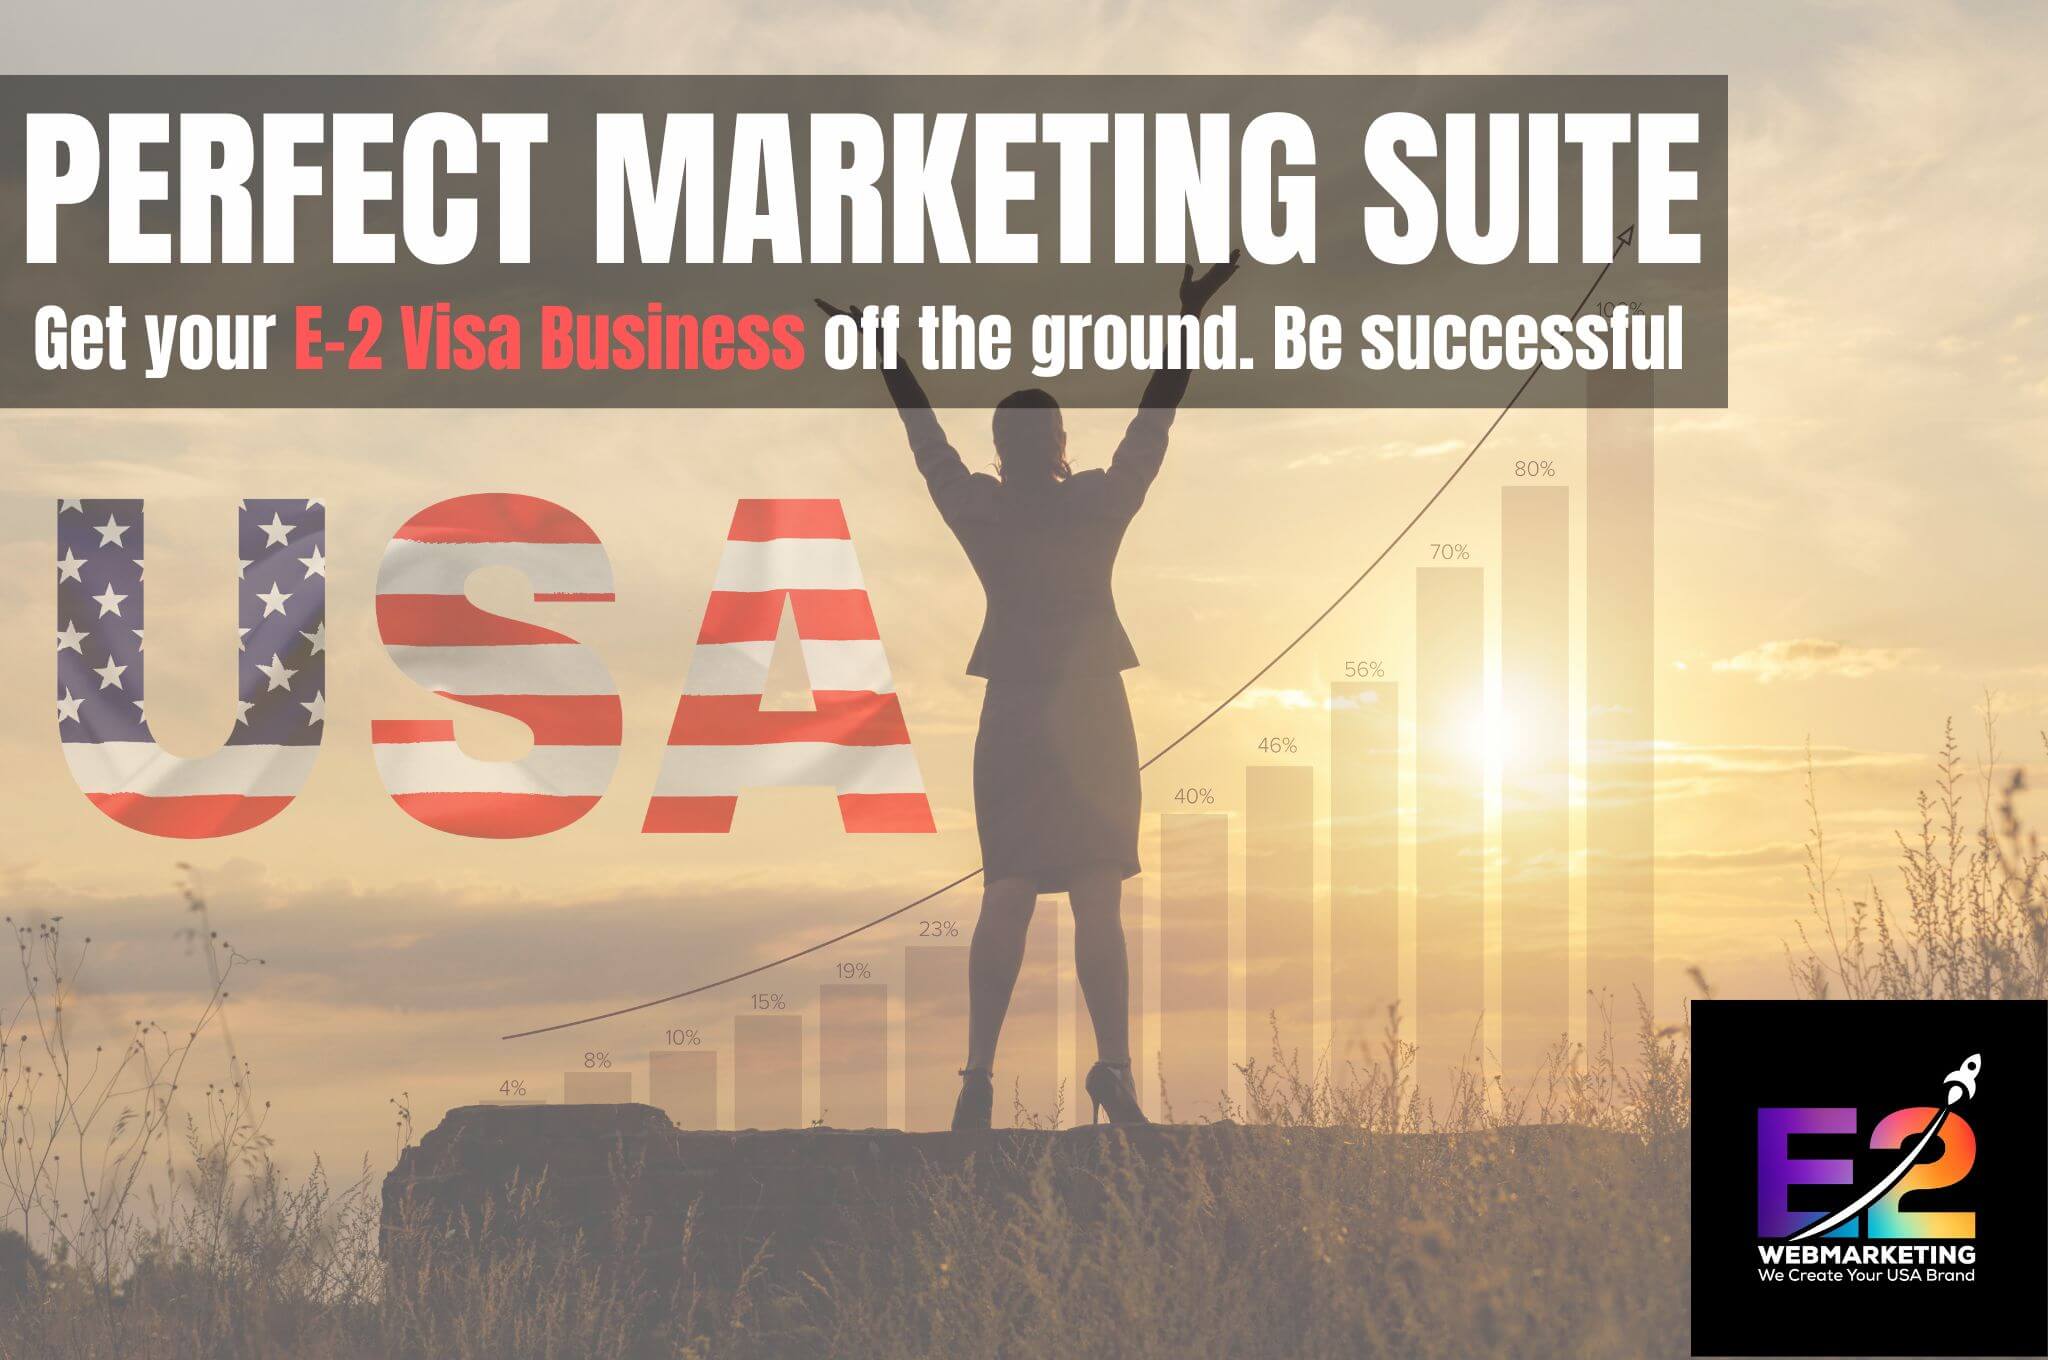 Get tips and tools for a lasting marketing success in the u.s. - e-2 visa marketing is vital for all entrepreneurs coming to the USA